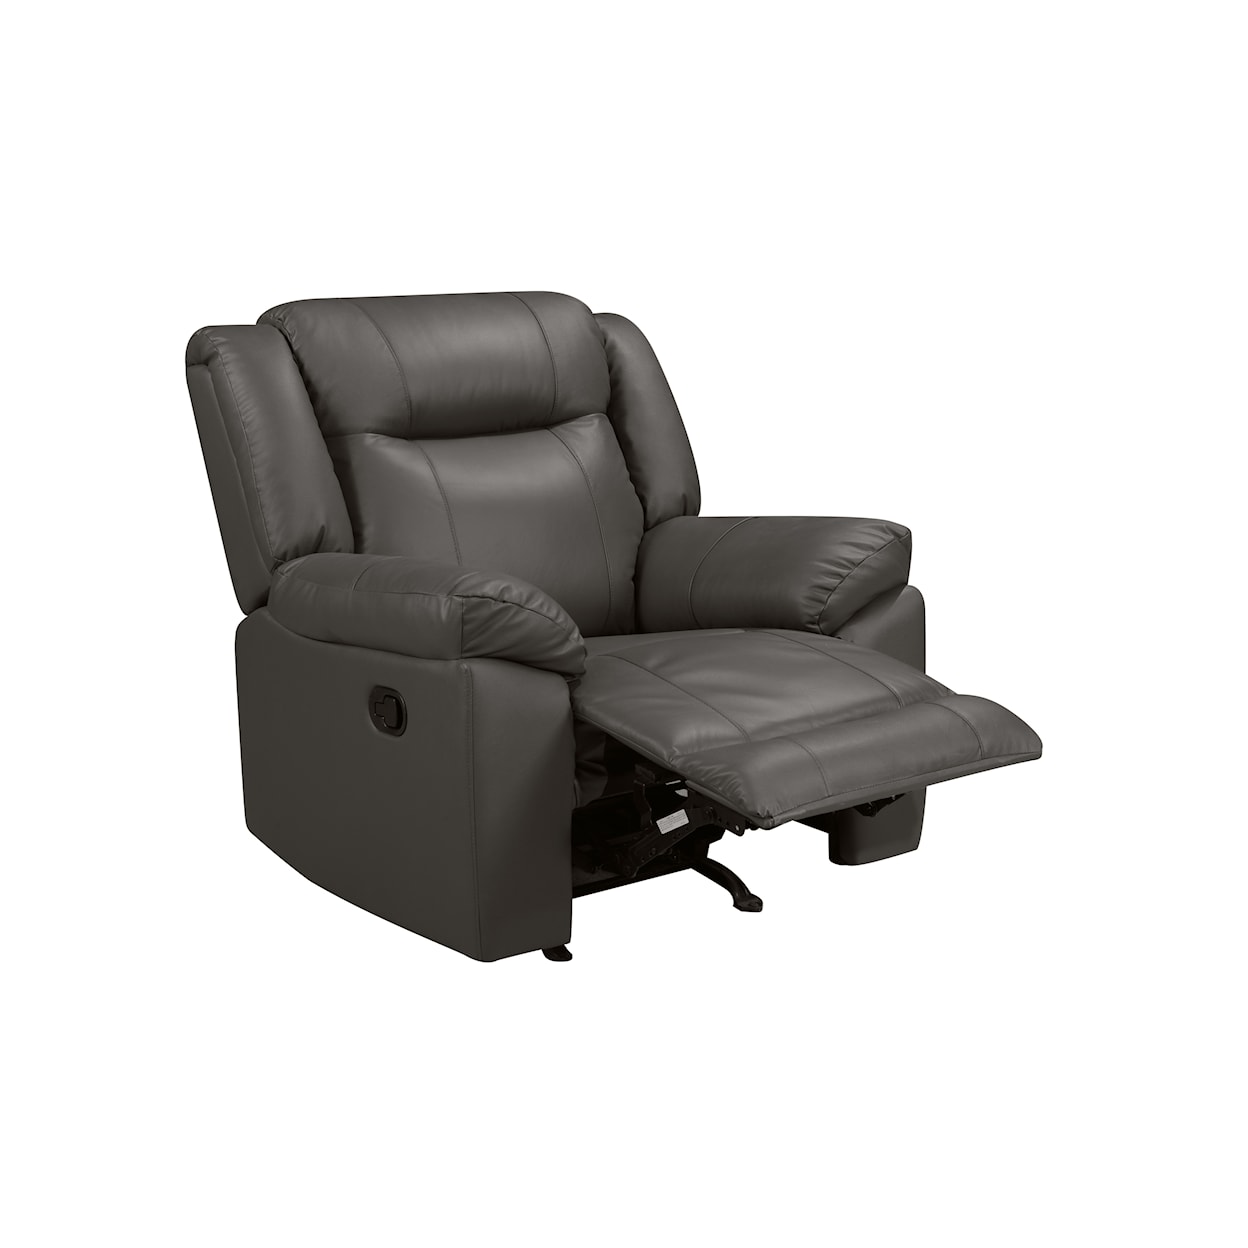 New Classic Taggart Leather Rocker Recliner